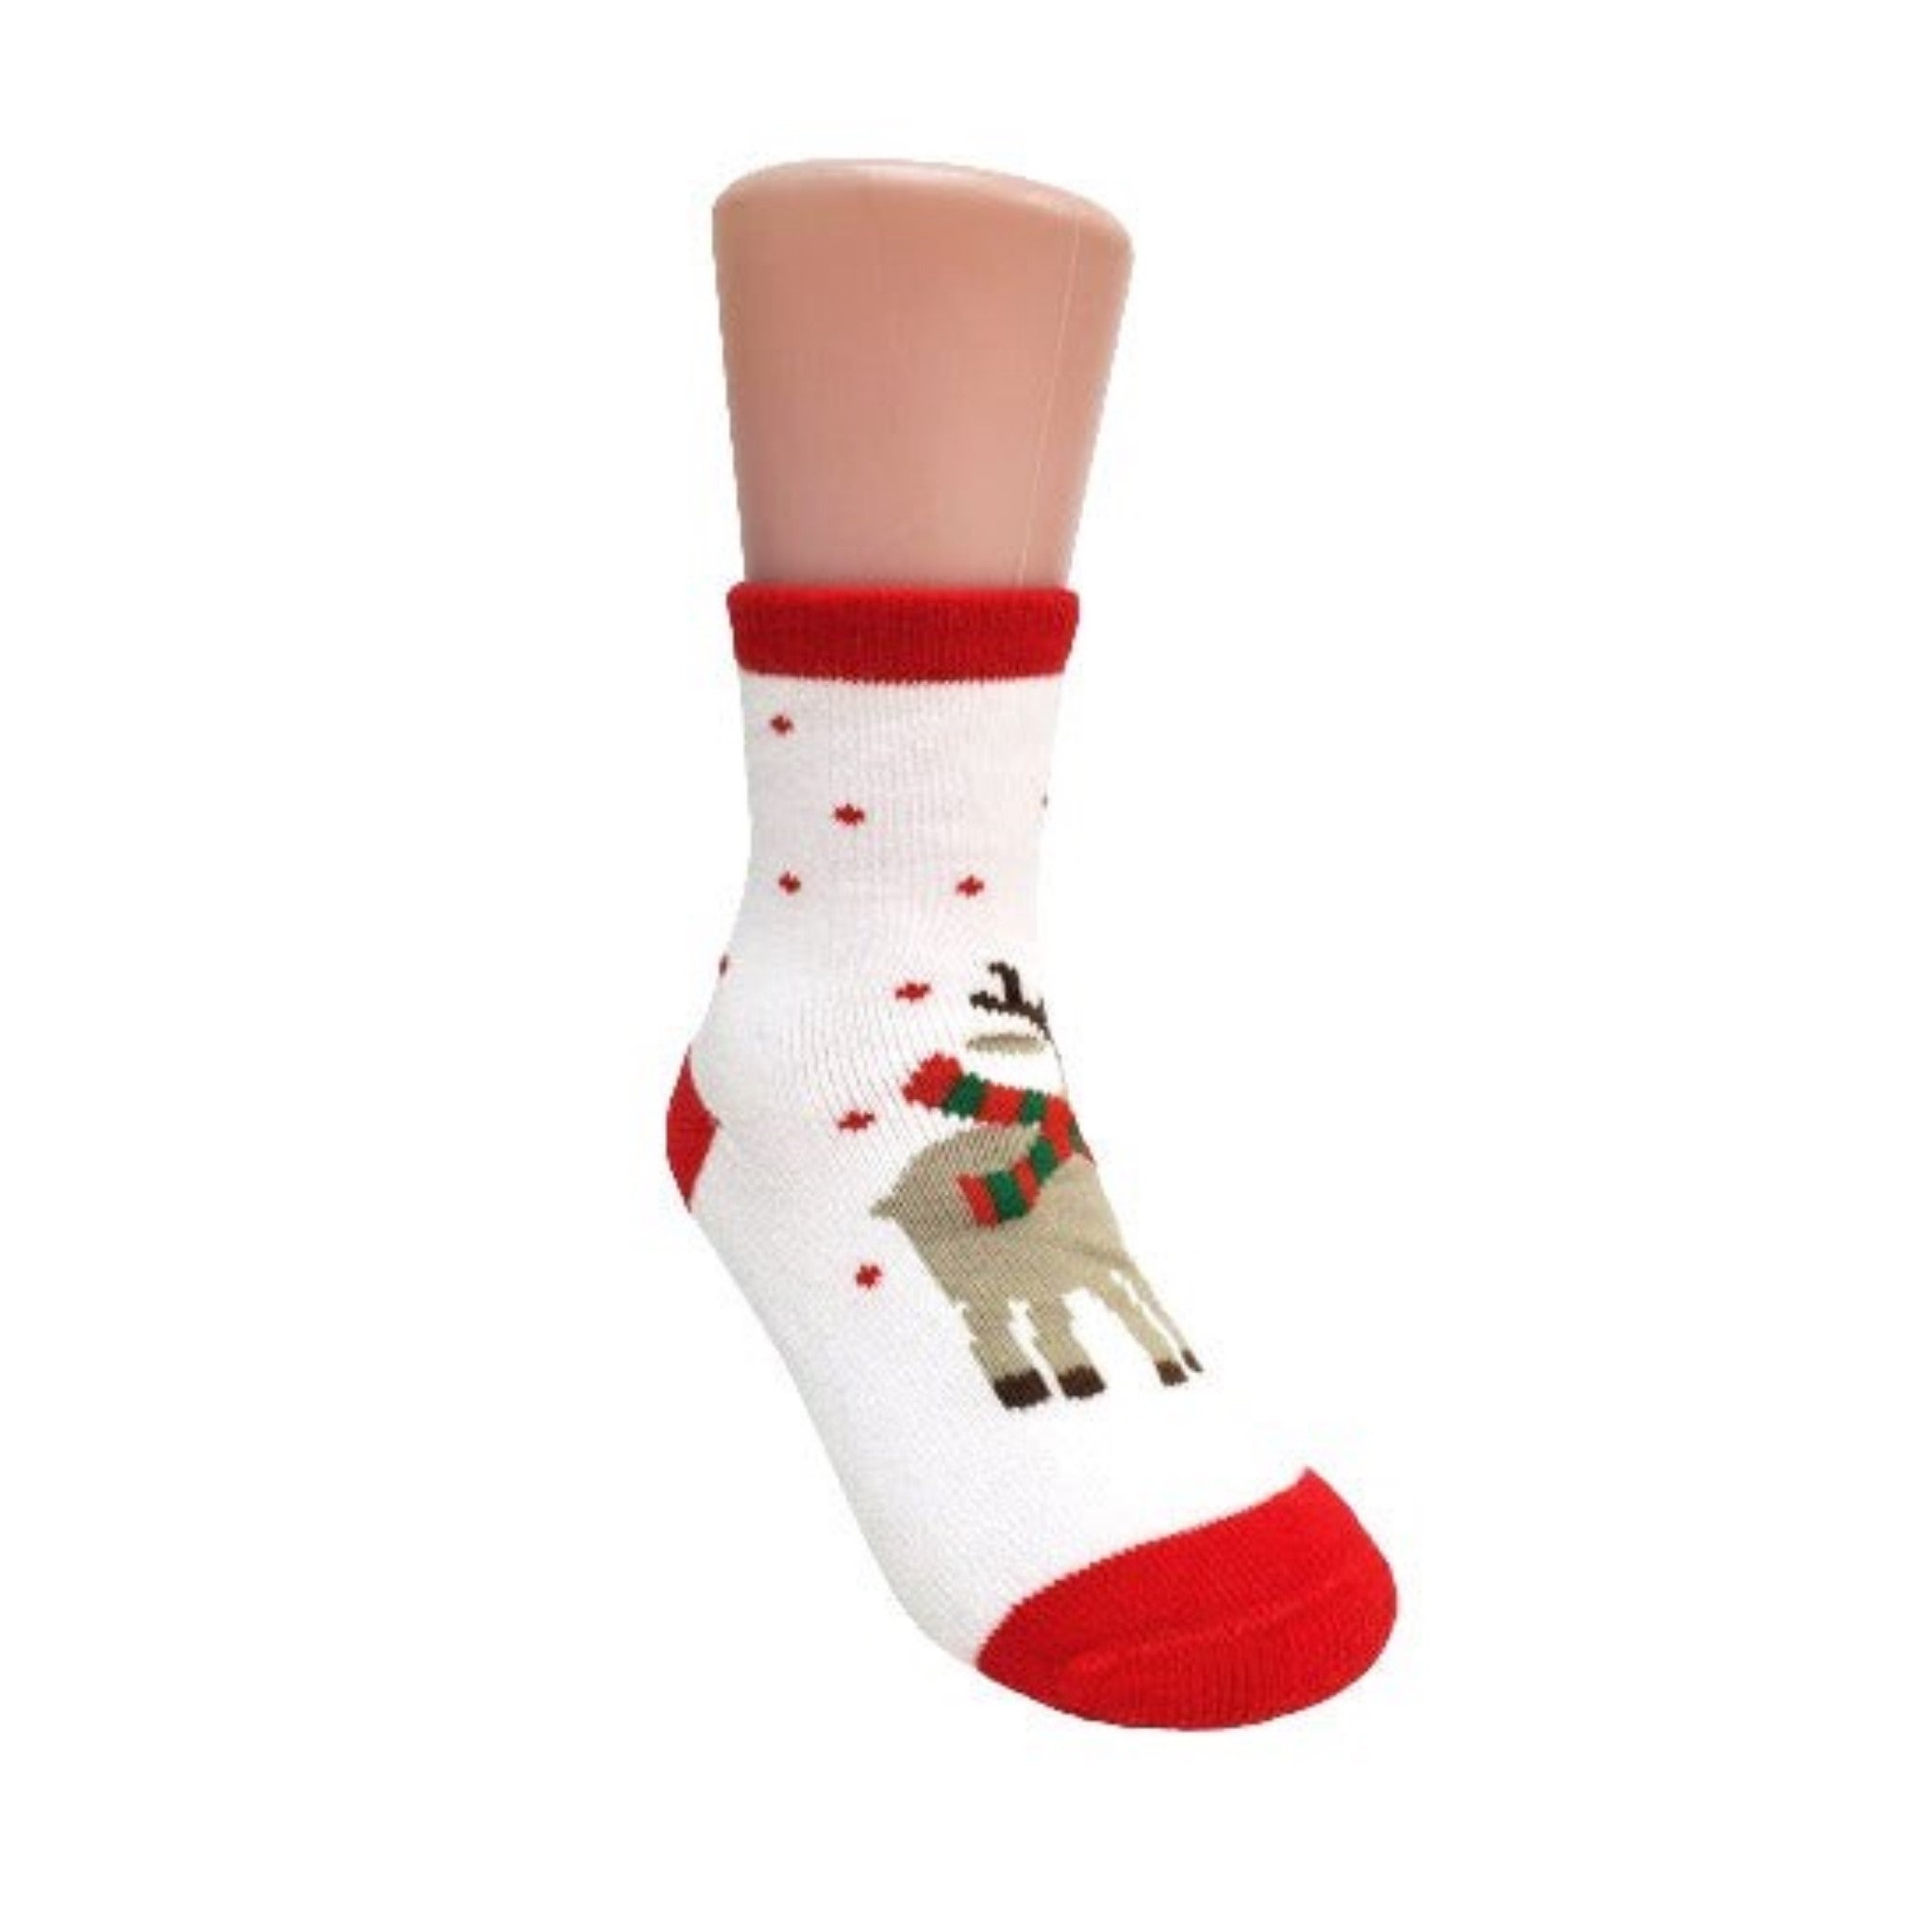 Reindeer Wearing a Scarf Socks for Kids (Ages 6 mo. to 5 yr)